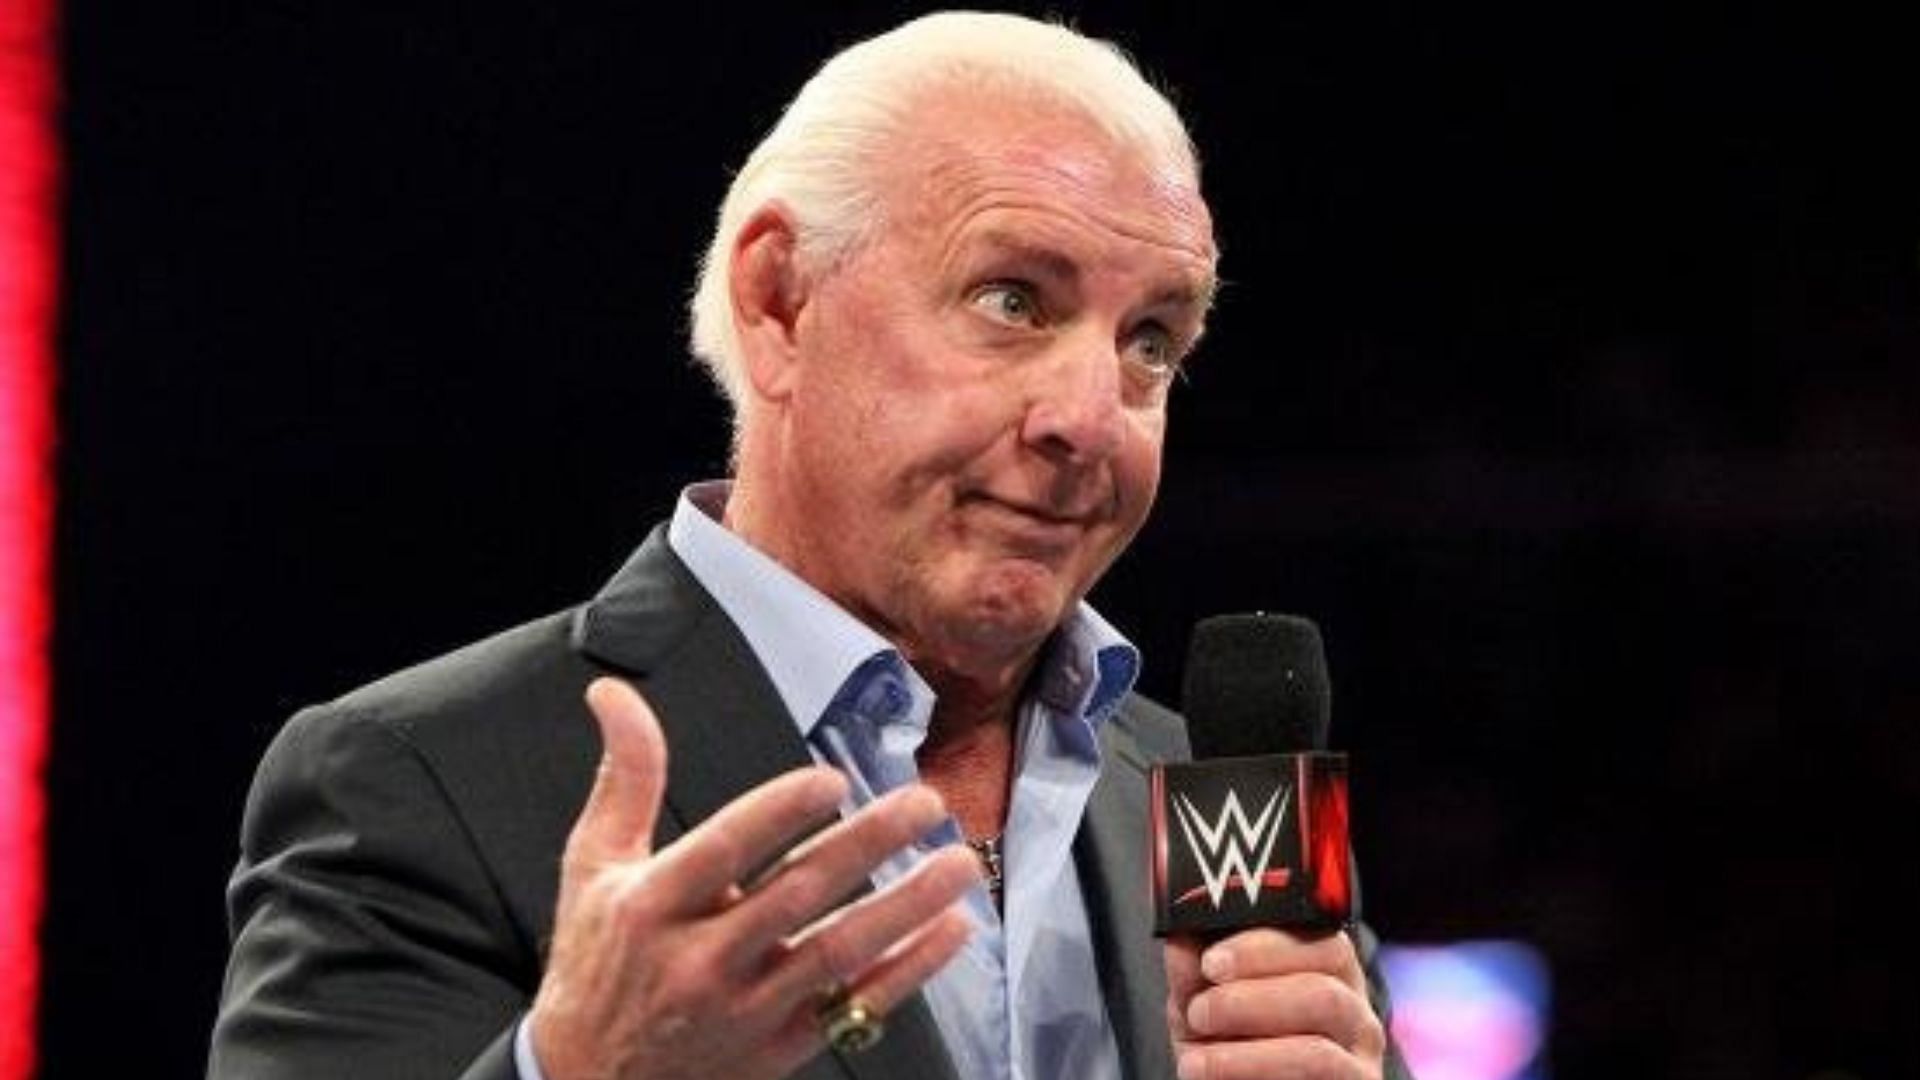 WWE legend Ric Flair delivering a promo during an episode of RAW